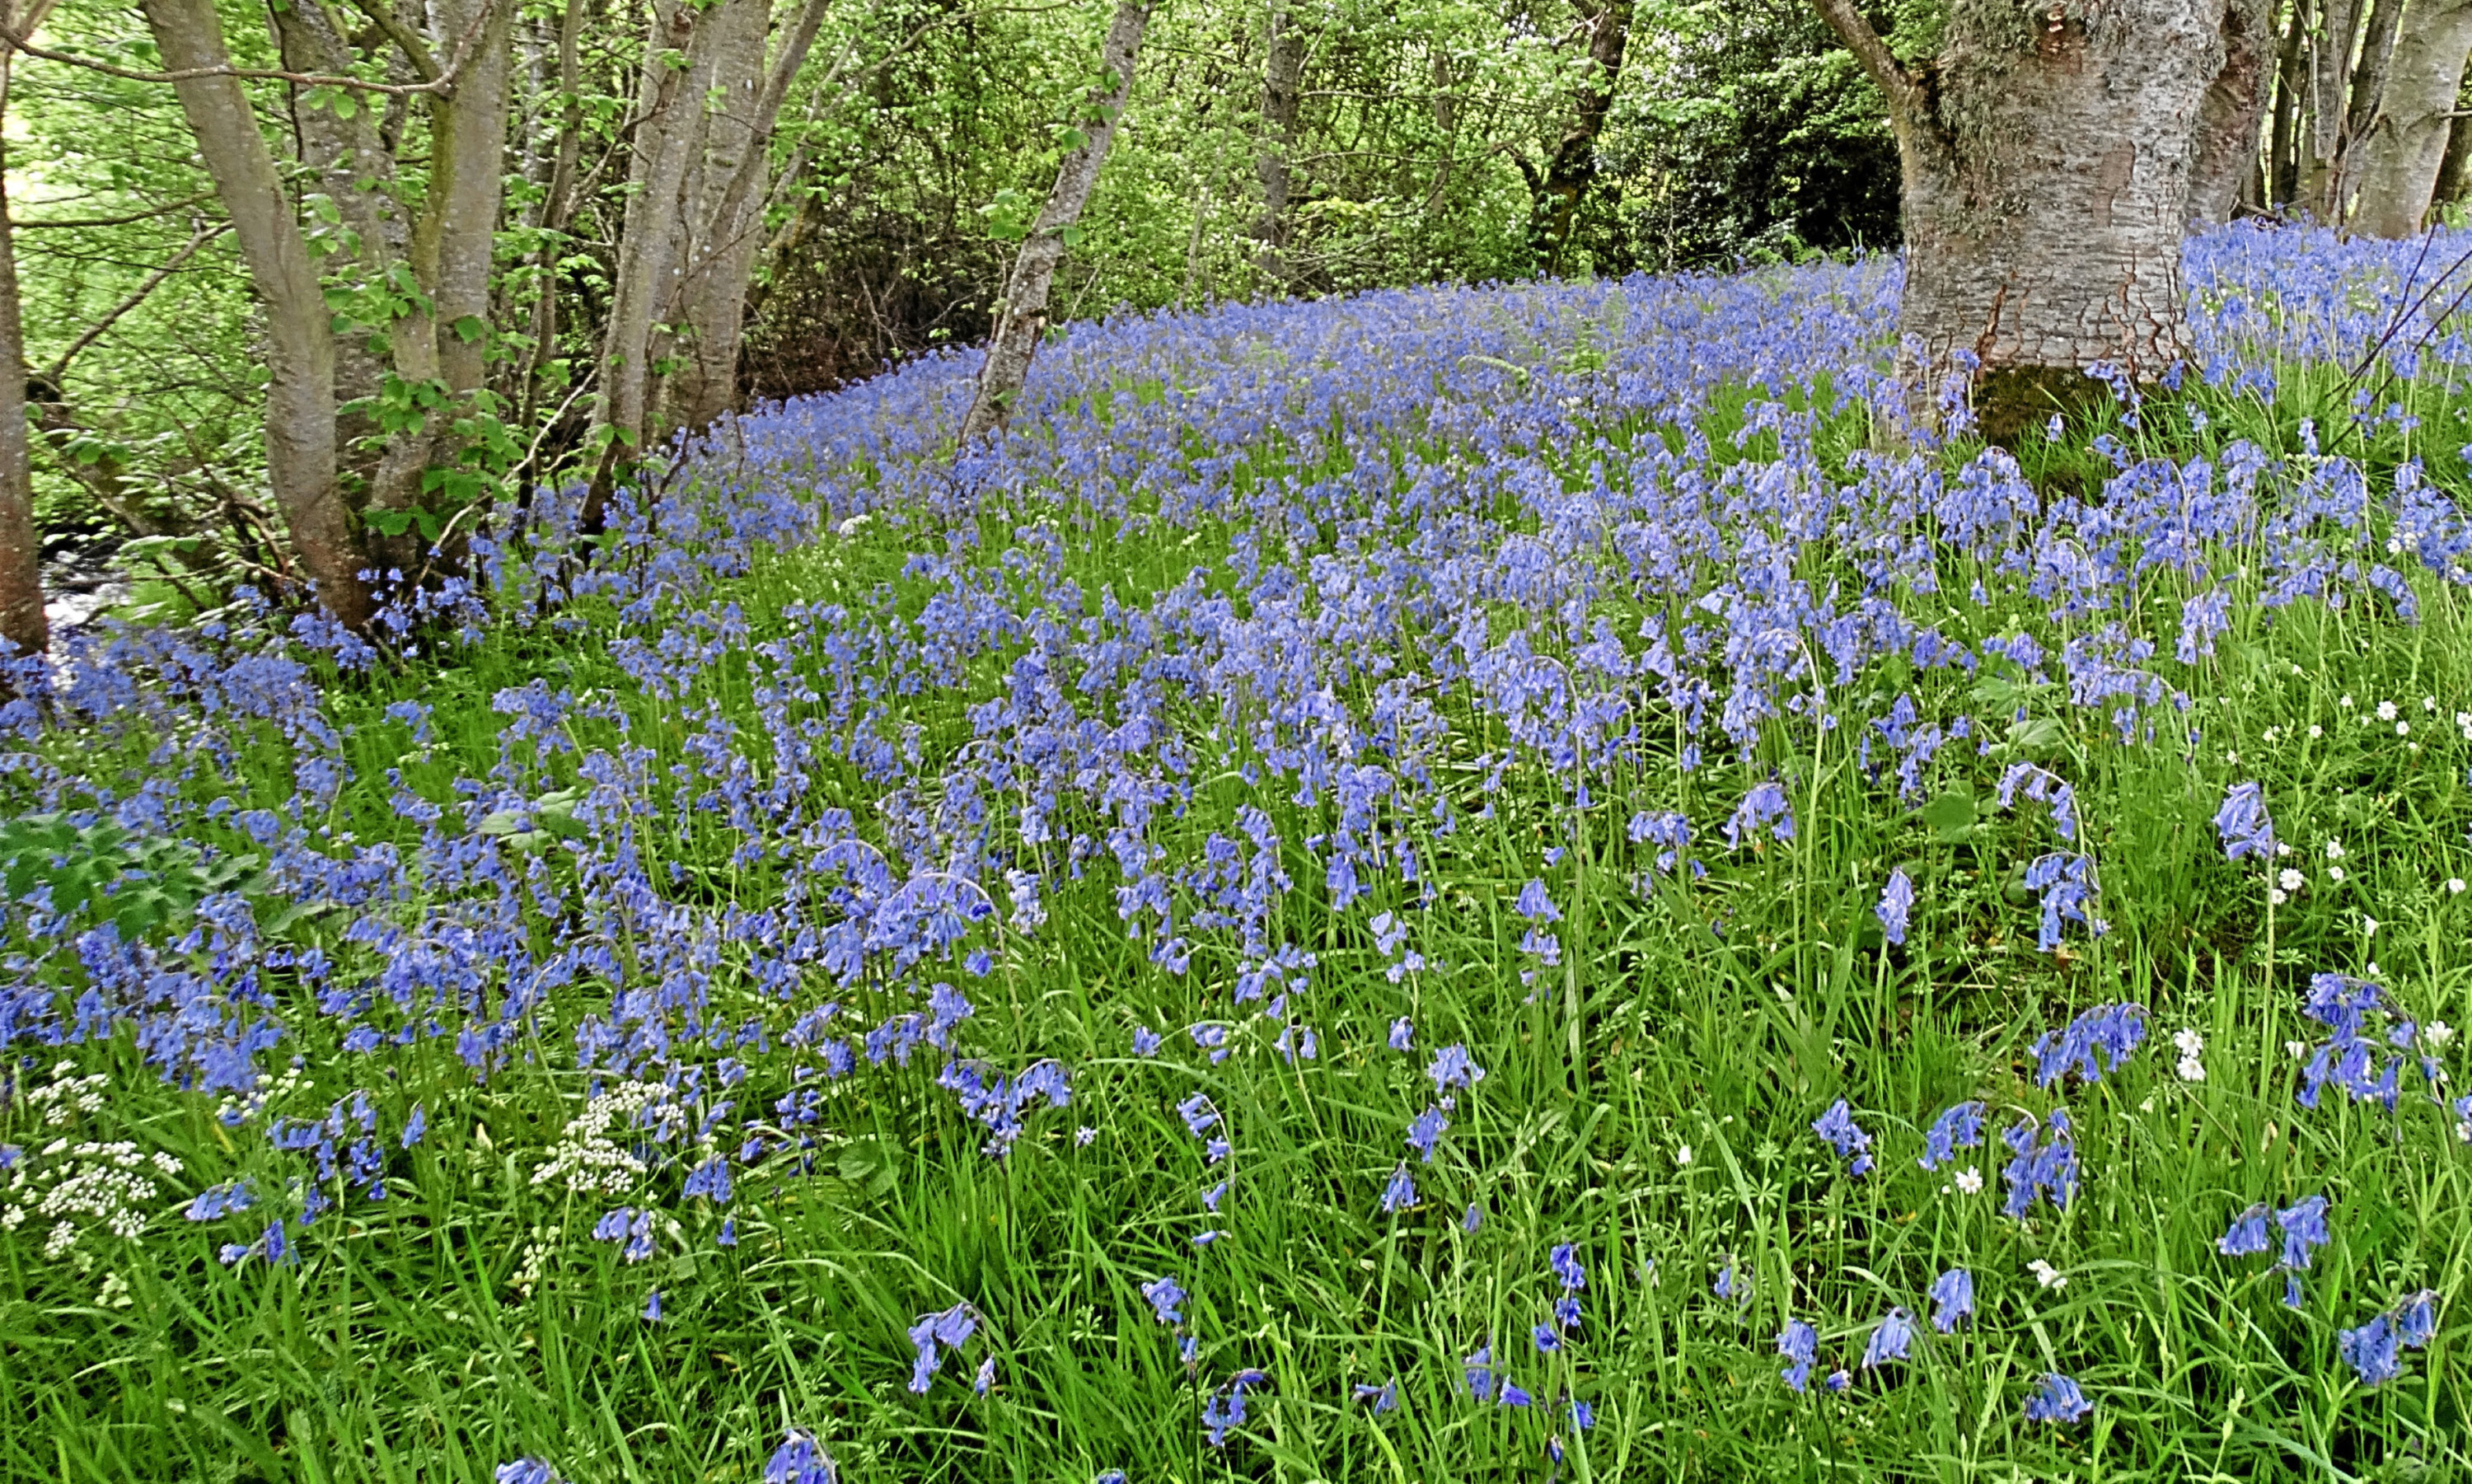 A bank of bluebells on the Black Isle.